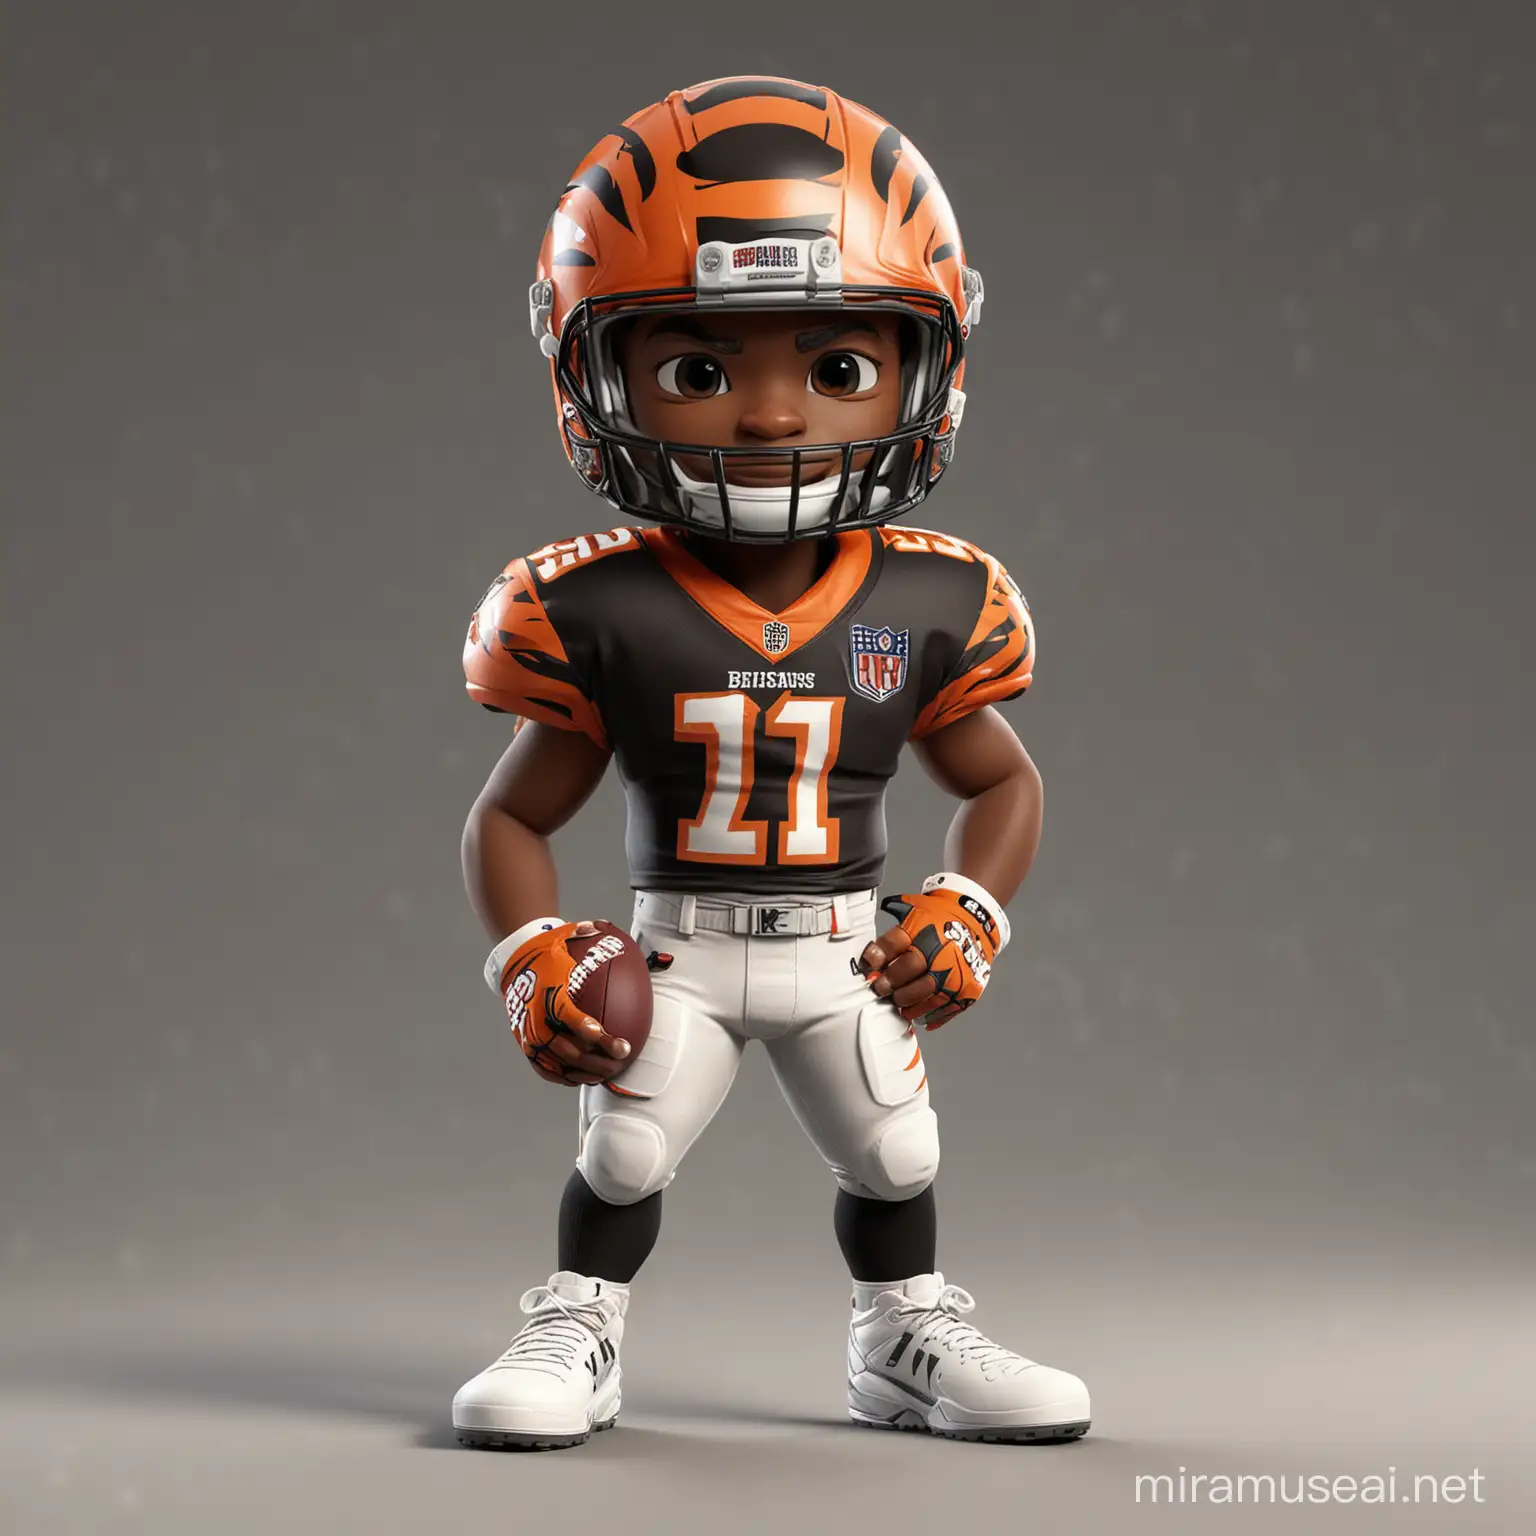 Adorable Cartoon Style NFL Player Resembling JaMarr Chase in Cincinnati Bengals Gear